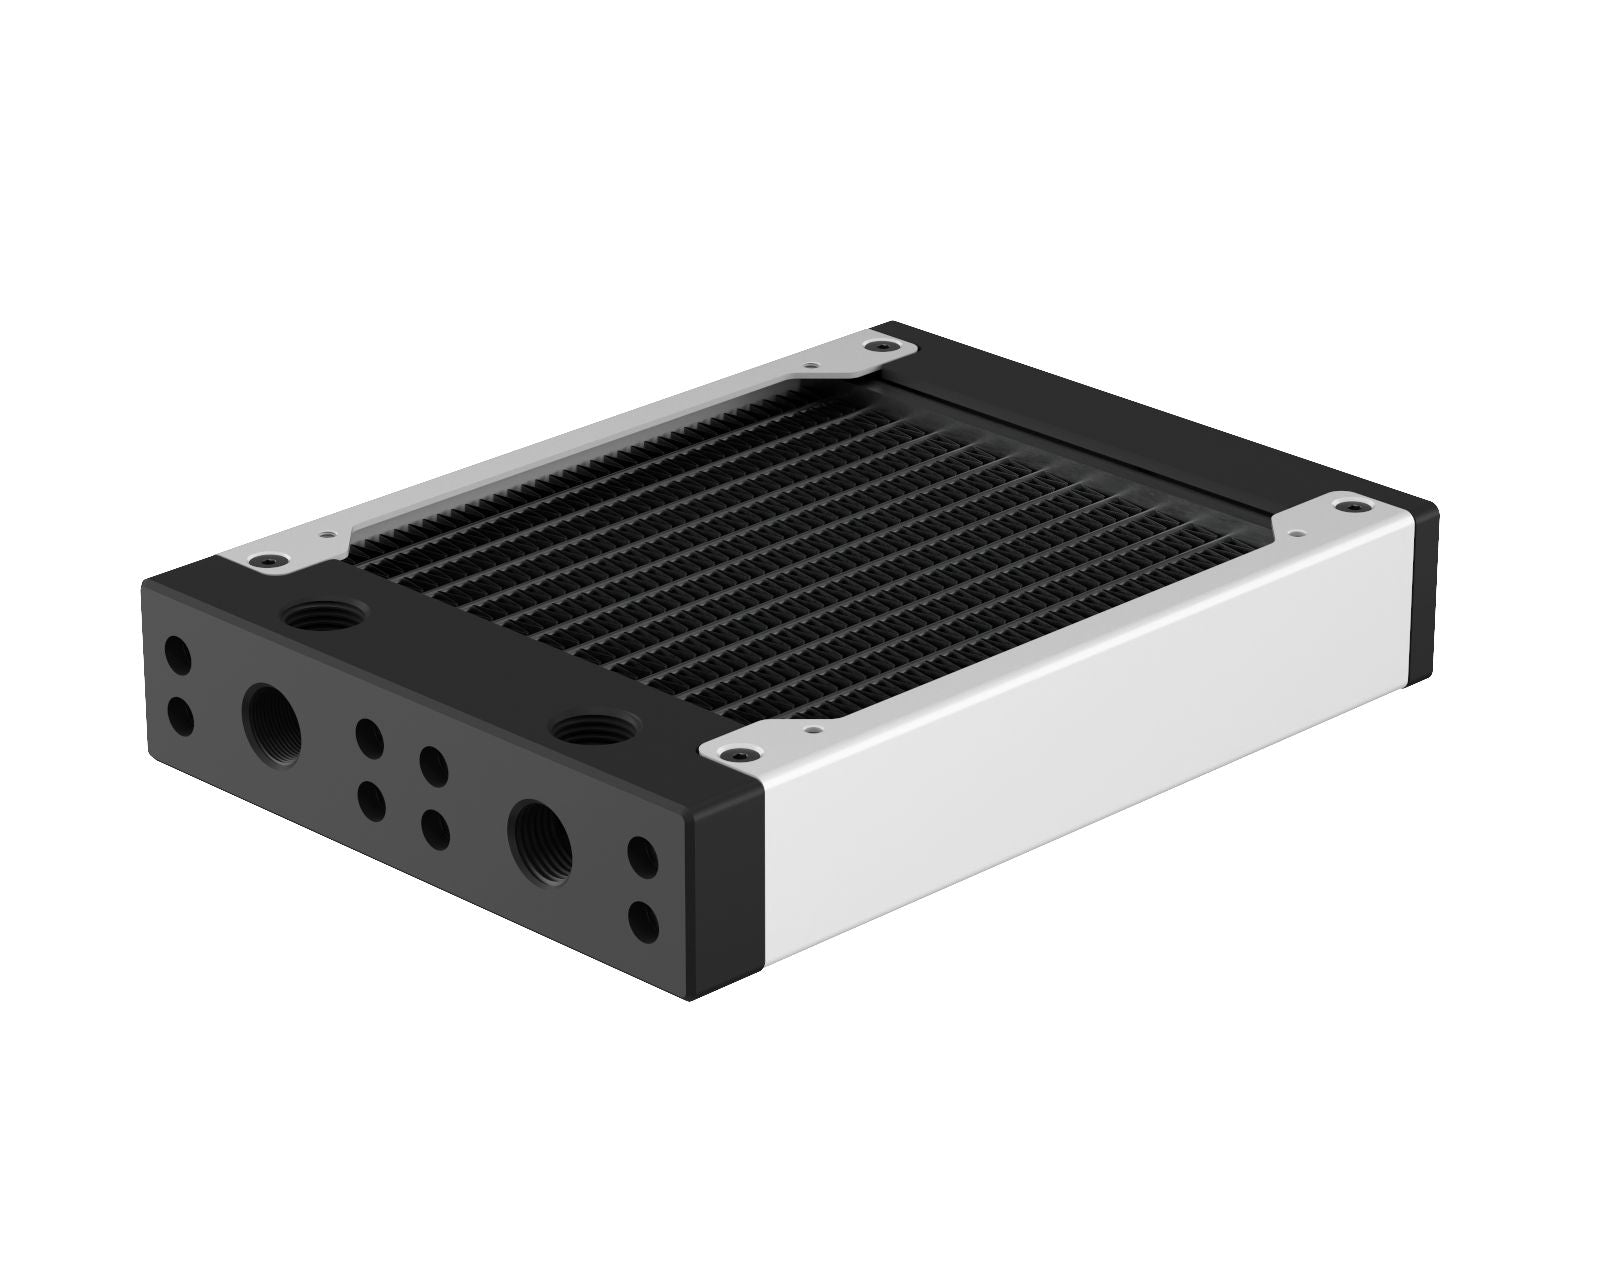 PrimoChill 120SL (30mm) EXIMO Modular Radiator, Black POM, 1x120mm, Single Fan (R-SL-BK12) Available in 20+ Colors, Assembled in USA and Custom Watercooling Loop Ready - Sky White